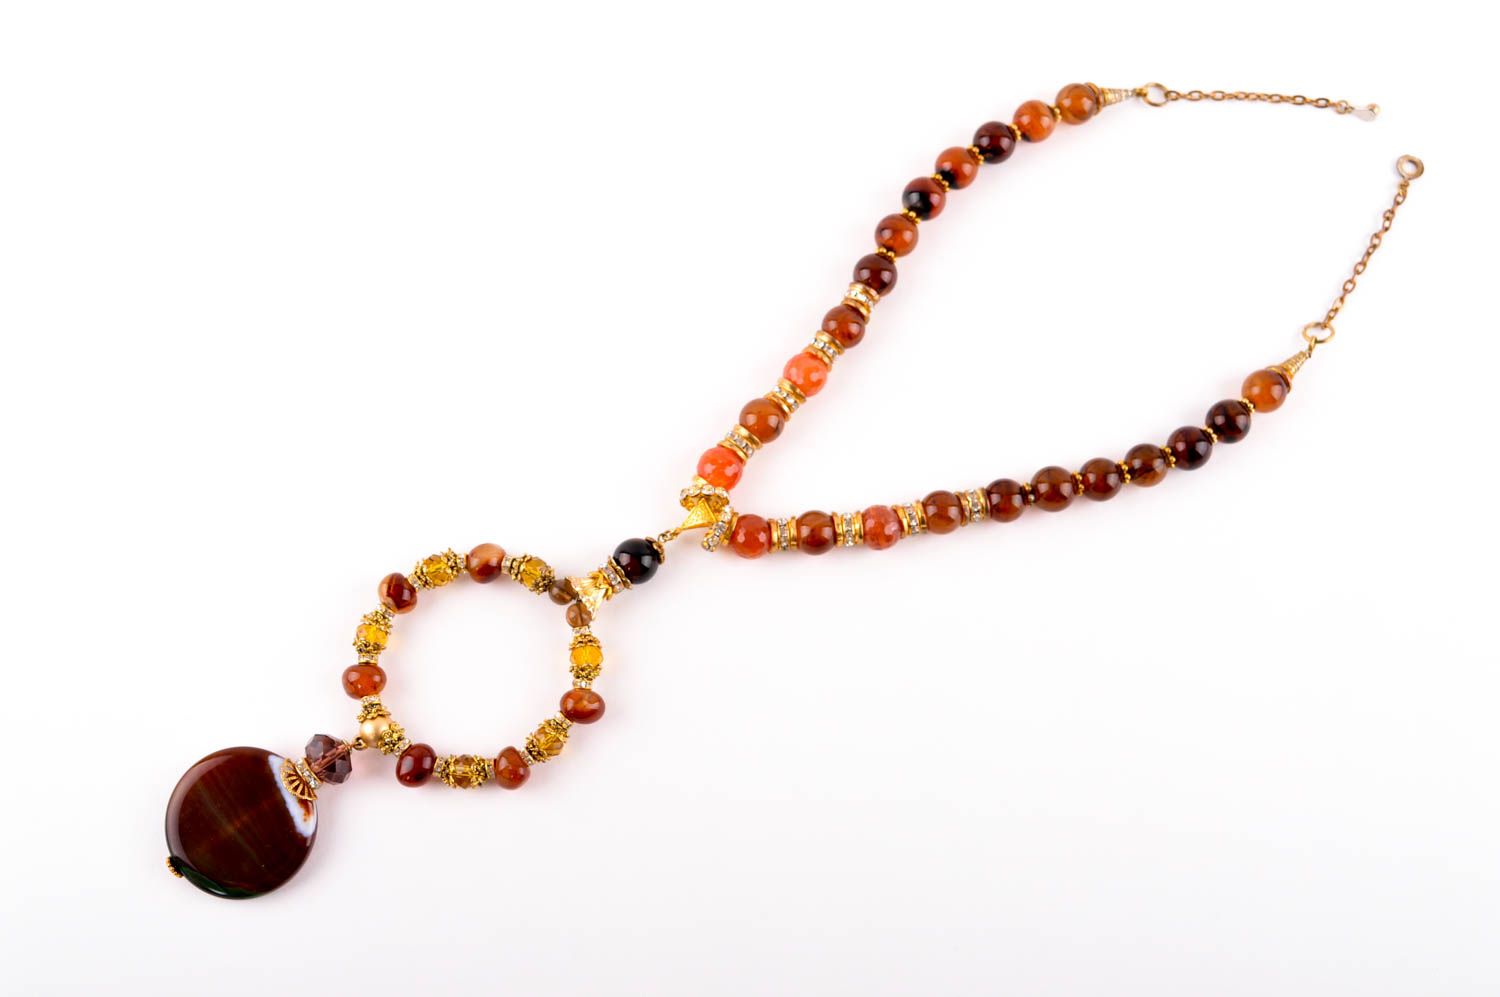 Handmade necklace designer necklace with natural stones unusual accessory photo 5